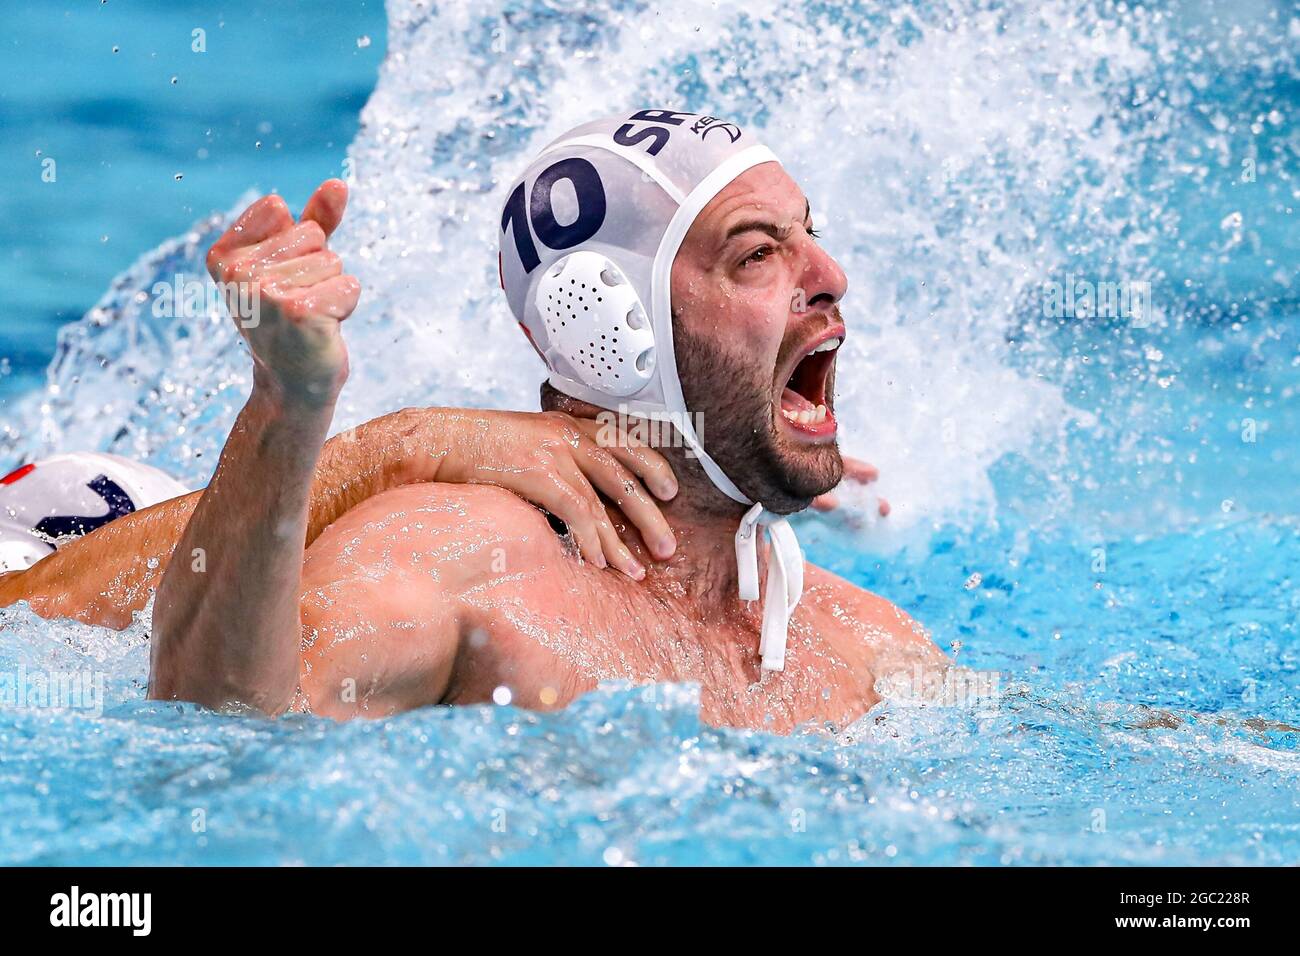 TOKYO, JAPAN - AUGUST 6: Filip Filipovic of Serbia is celebrating his goal during the Tokyo 2020 Olympic Waterpolo Tournament men's Semi Final match between Serbia and Spain at Tatsumi Waterpolo Centre on August 6, 2021 in Tokyo, Japan (Photo by Marcel ter Bals/Orange Pictures) Stock Photo